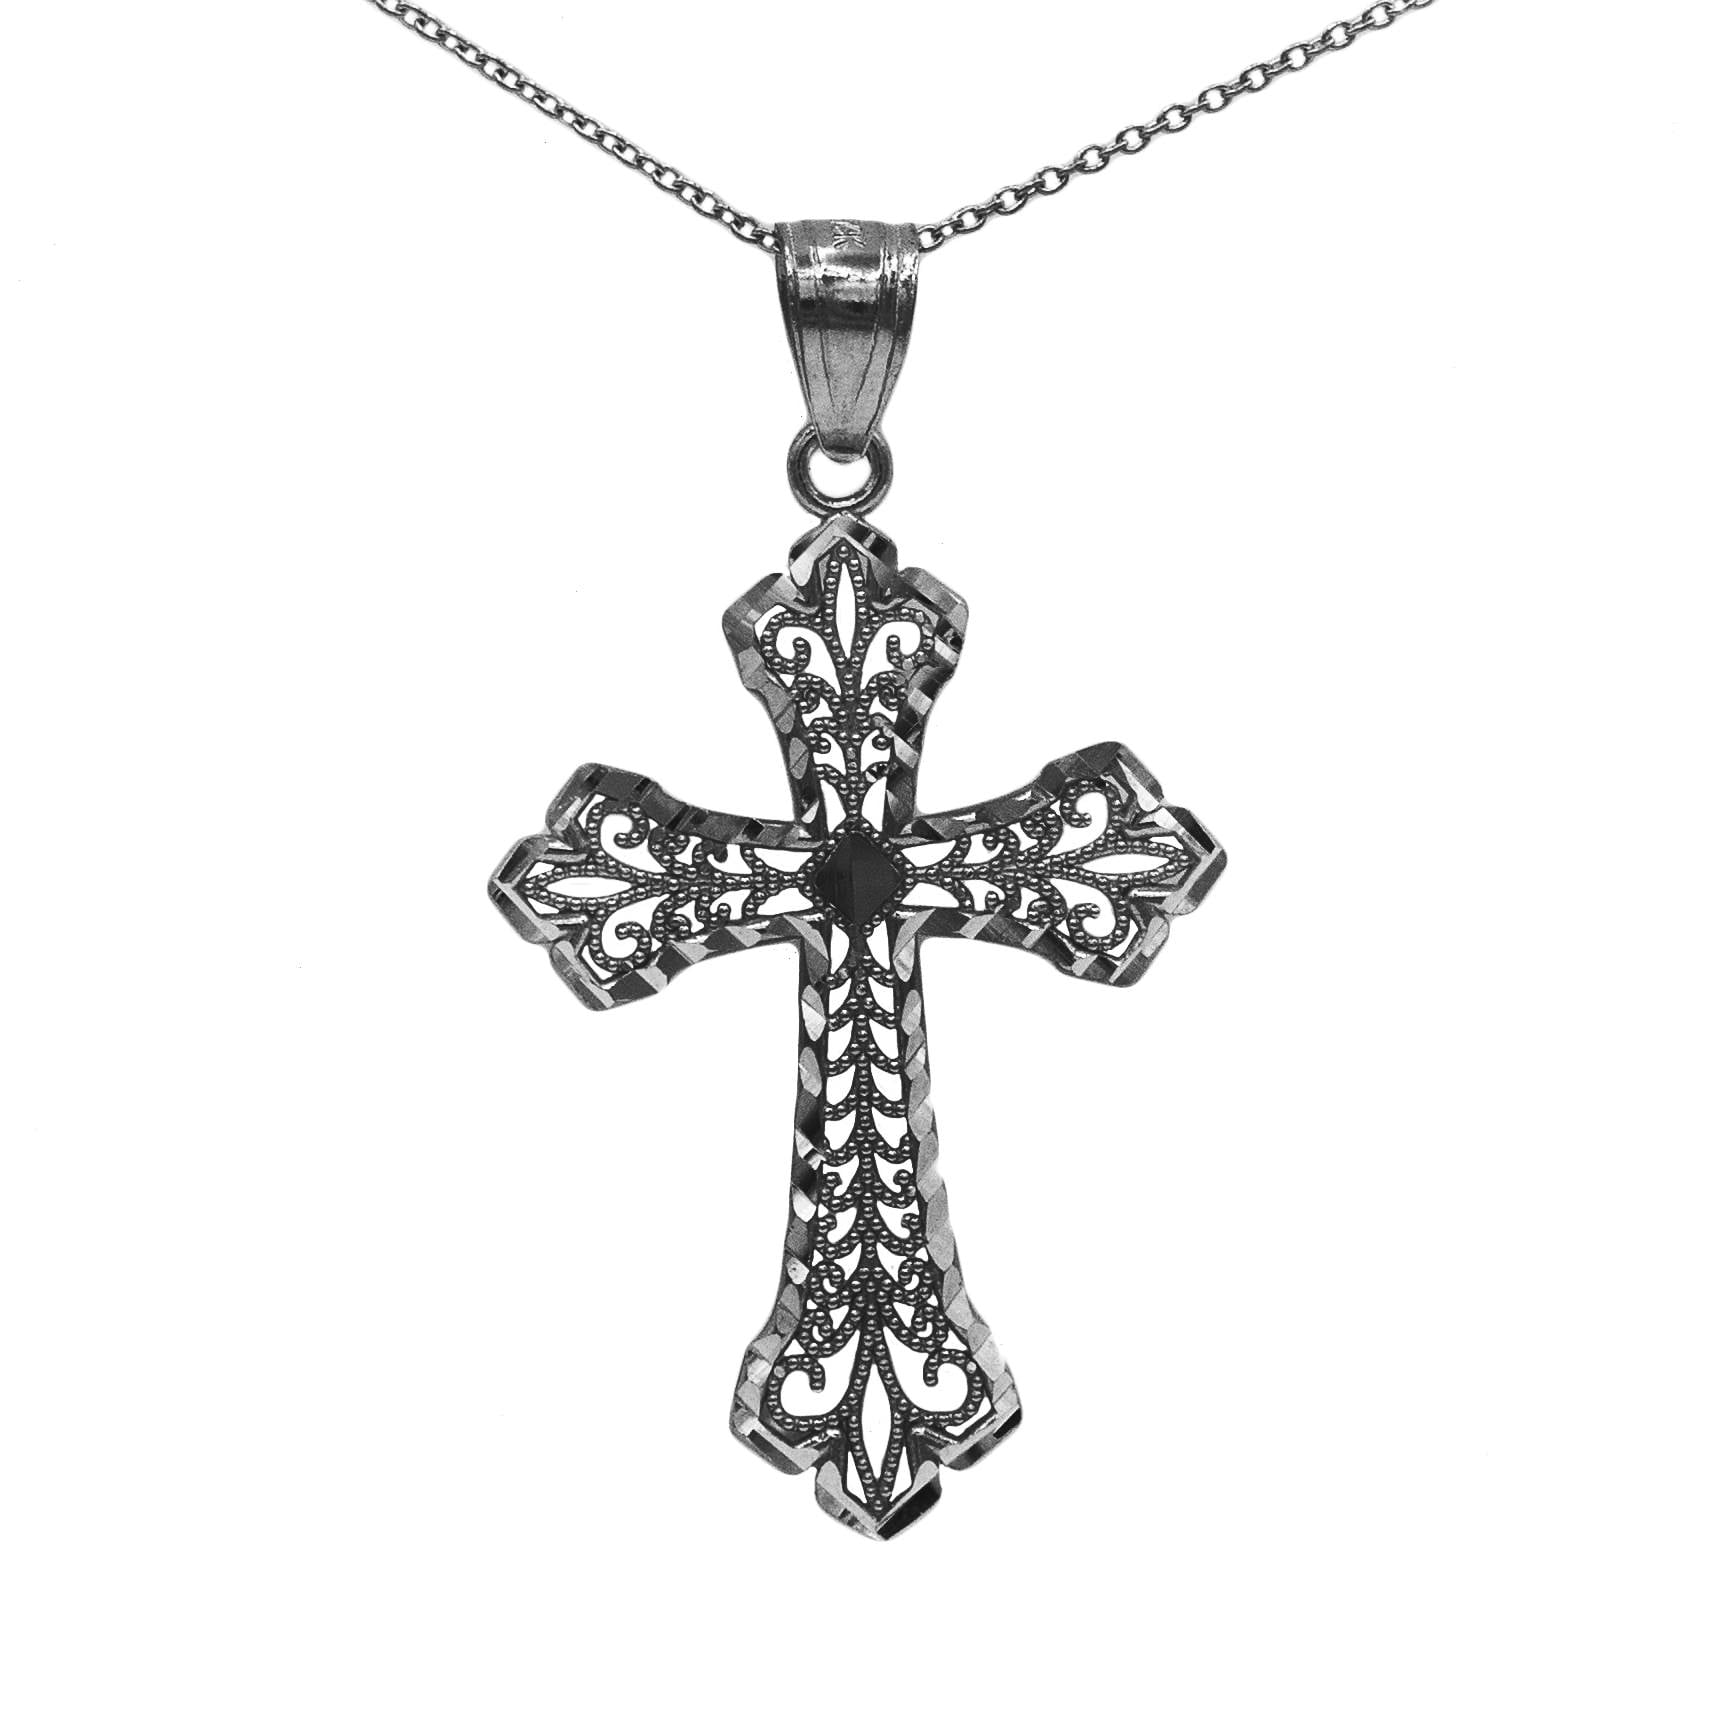 Jewels Obsession Cross Necklace 14K Rose Gold-plated 925 Silver Teutonic Cross Pendant with 16 Necklace